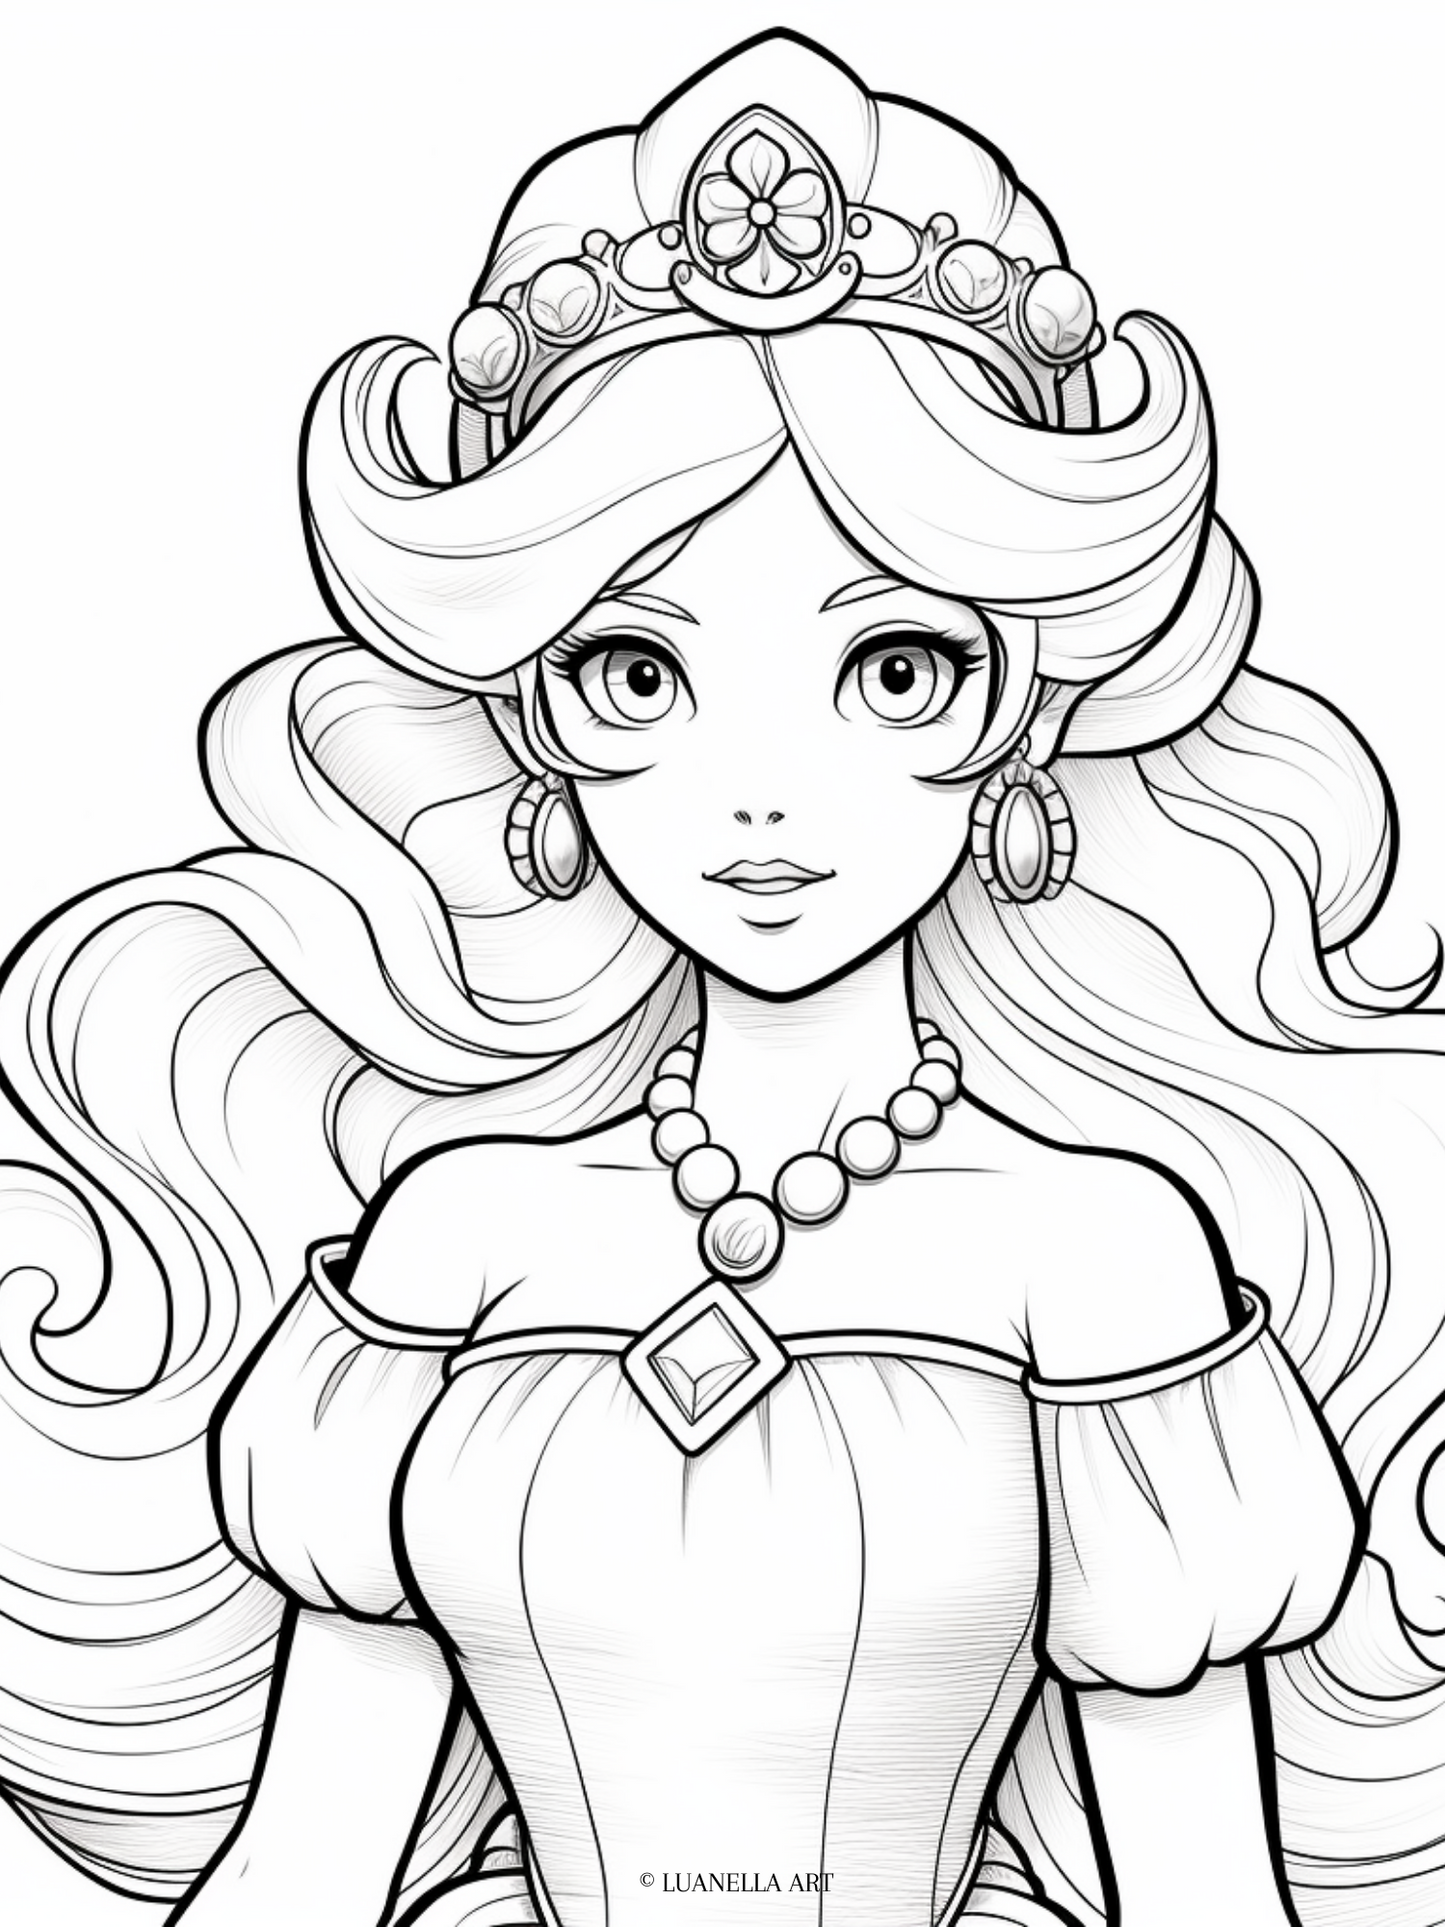 Princess Peach | Coloring Page | Instant Digital Download